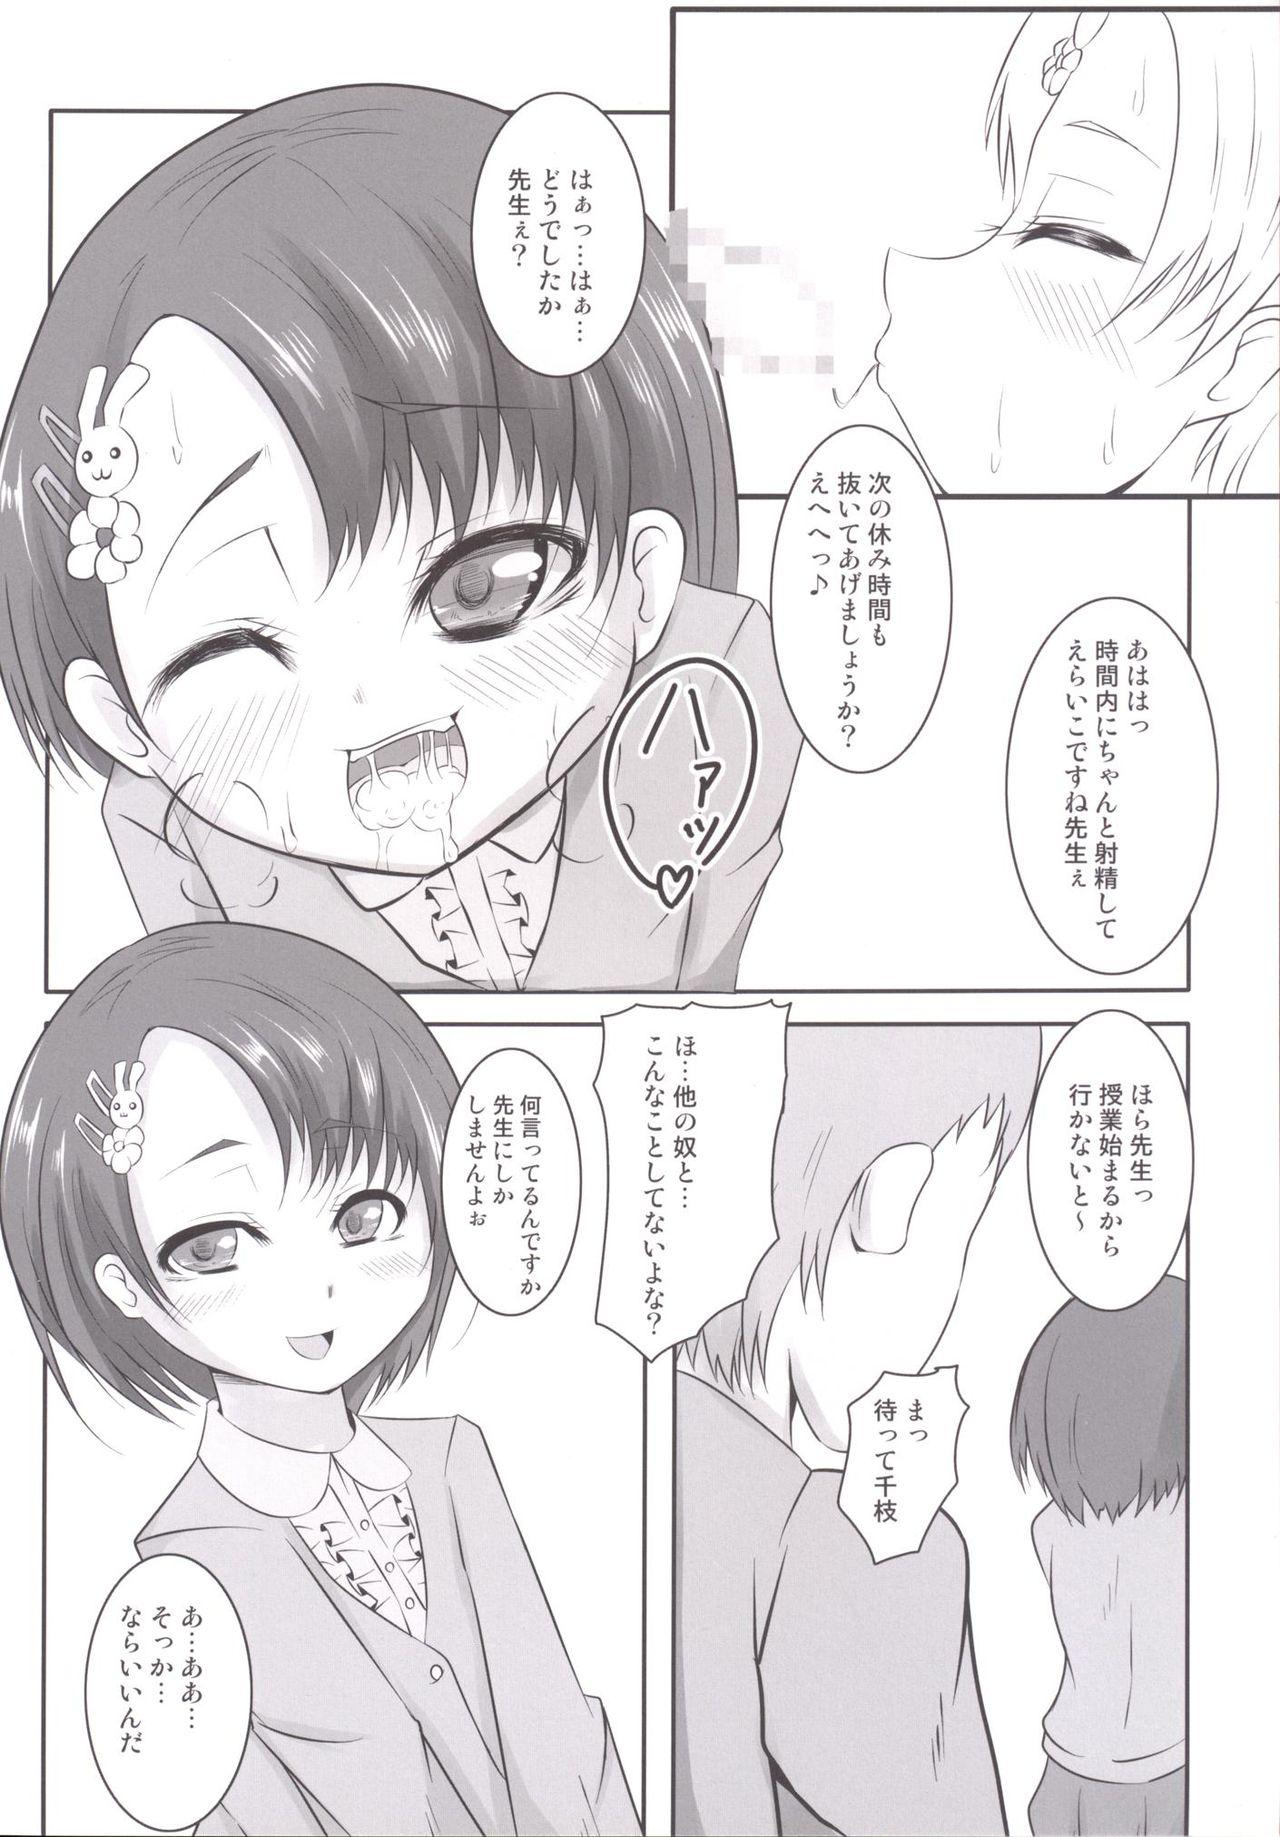 This Chie Top Idol Houkago Hen - The idolmaster Bro - Page 9